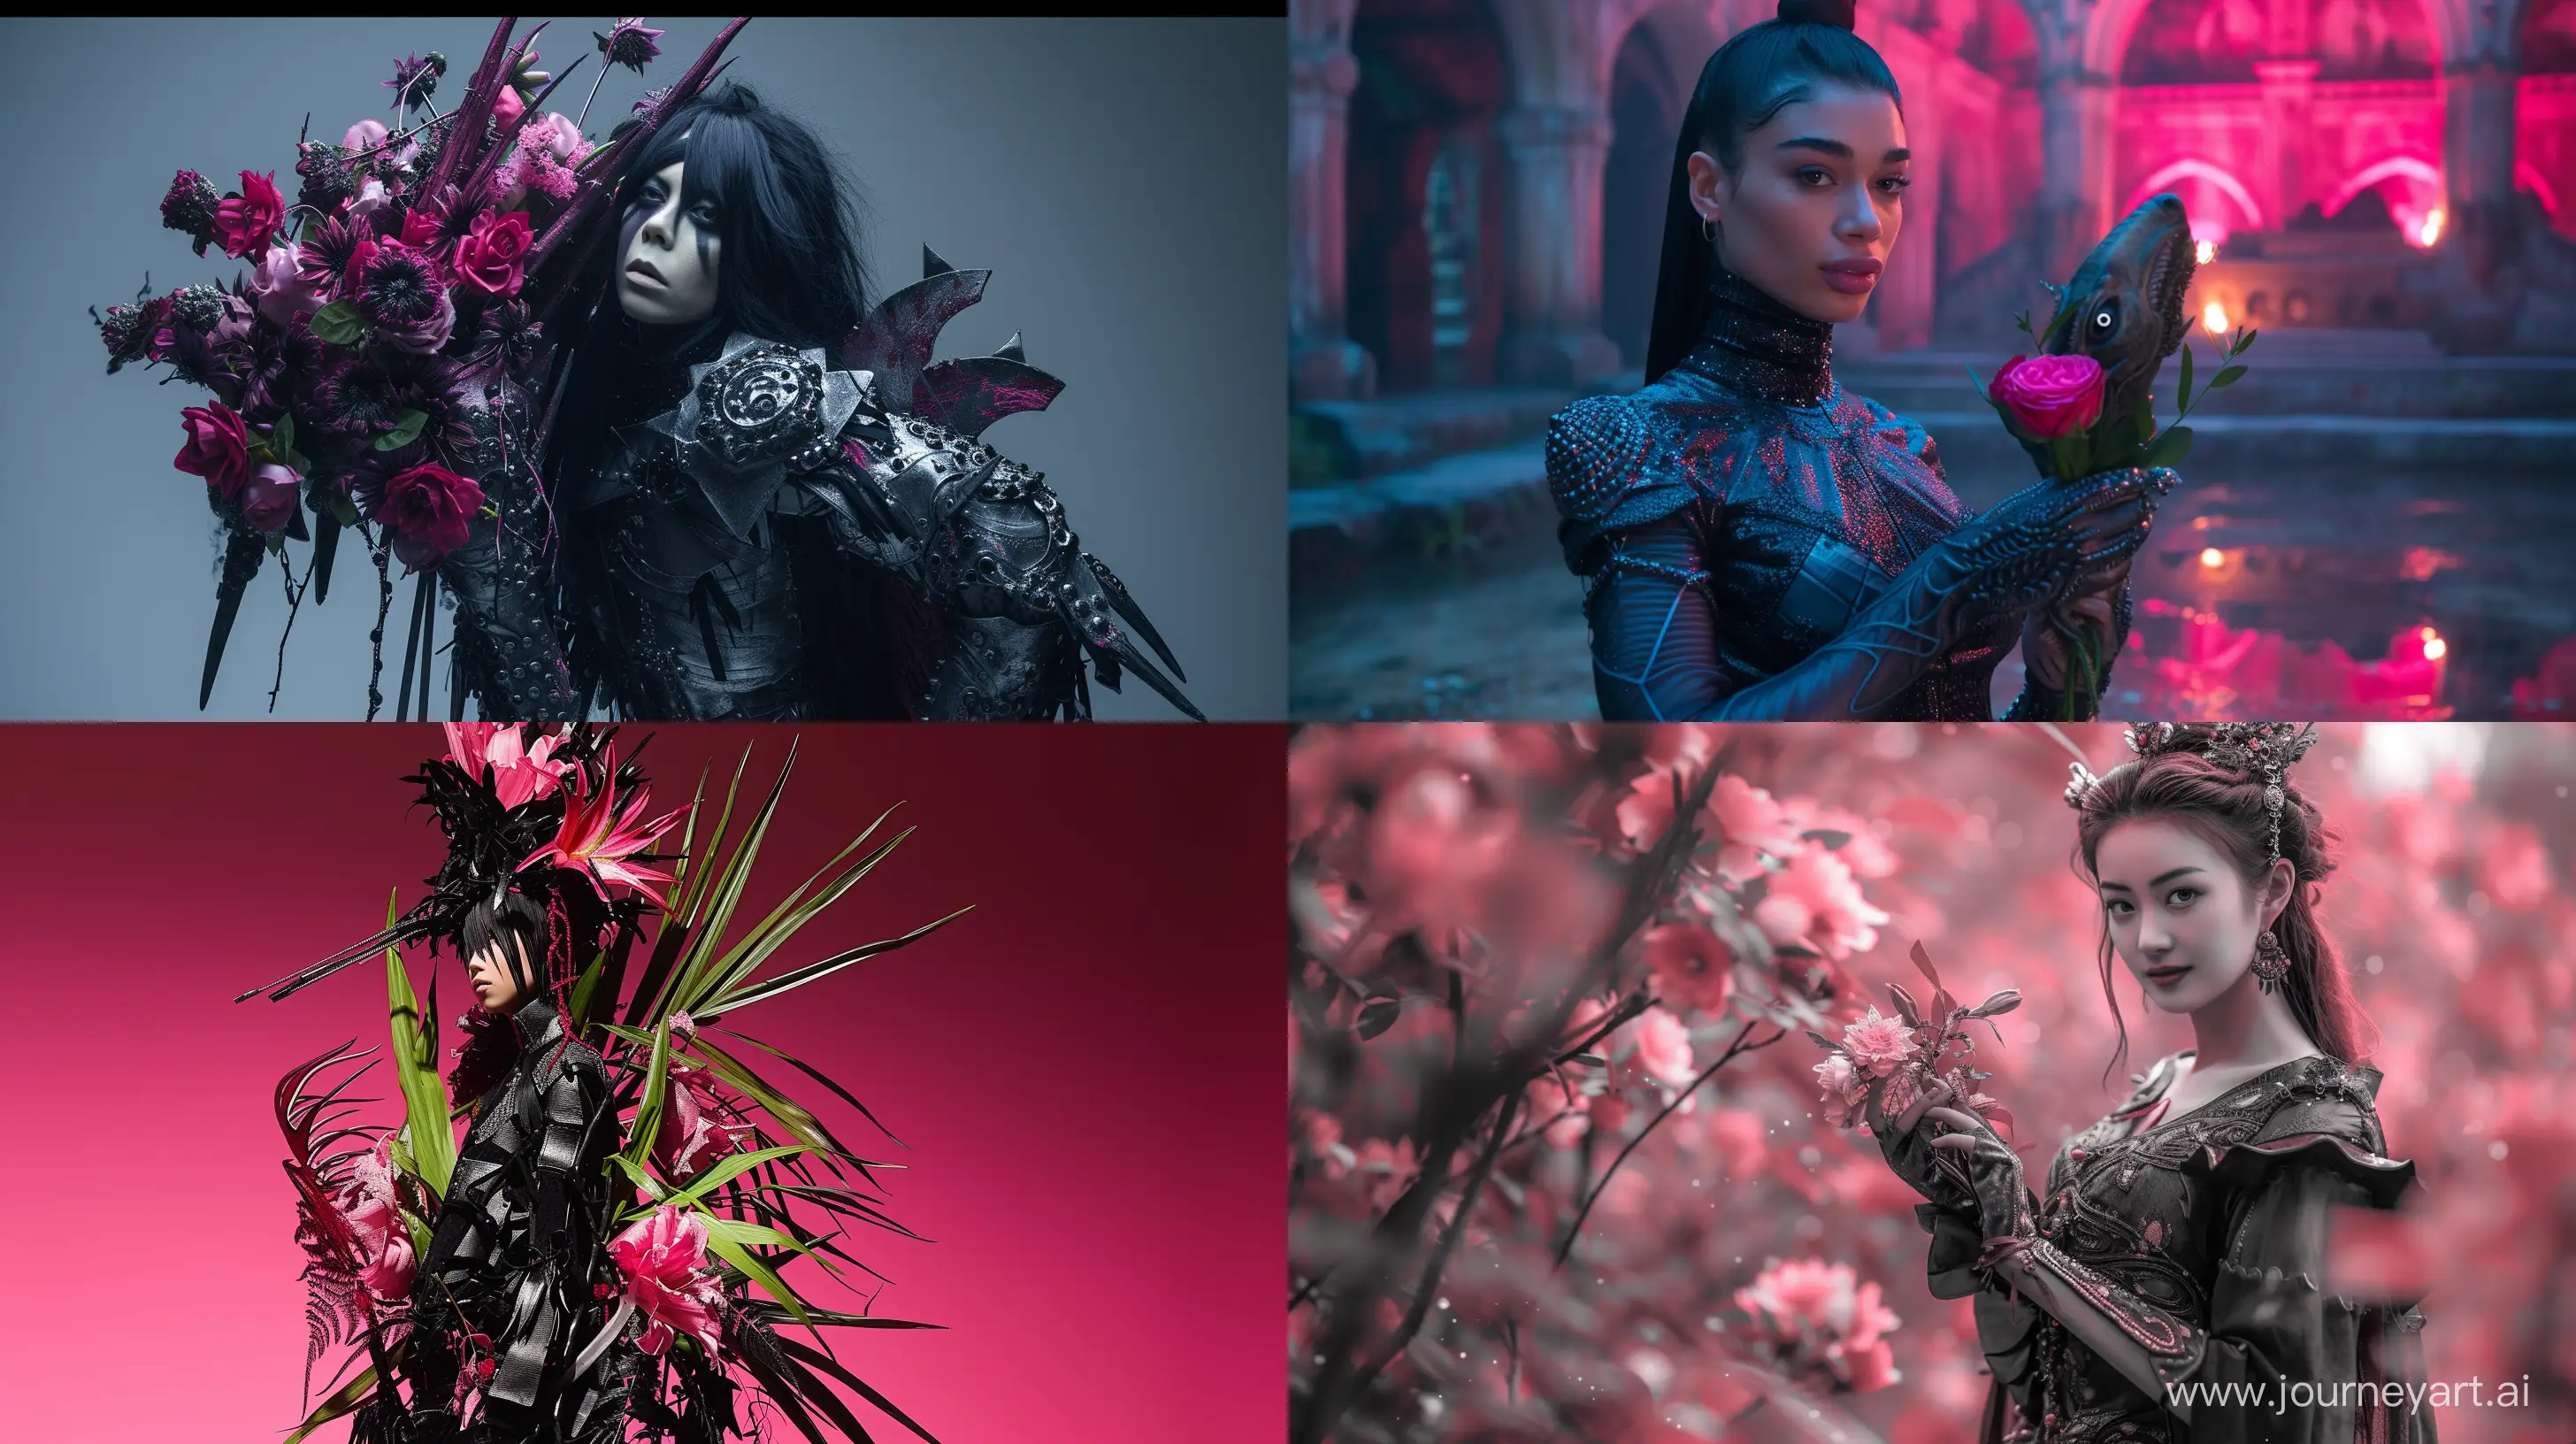 Darkly-Adorned-Woman-Holding-Enigmatic-Flowers-in-Daft-Punk-Style